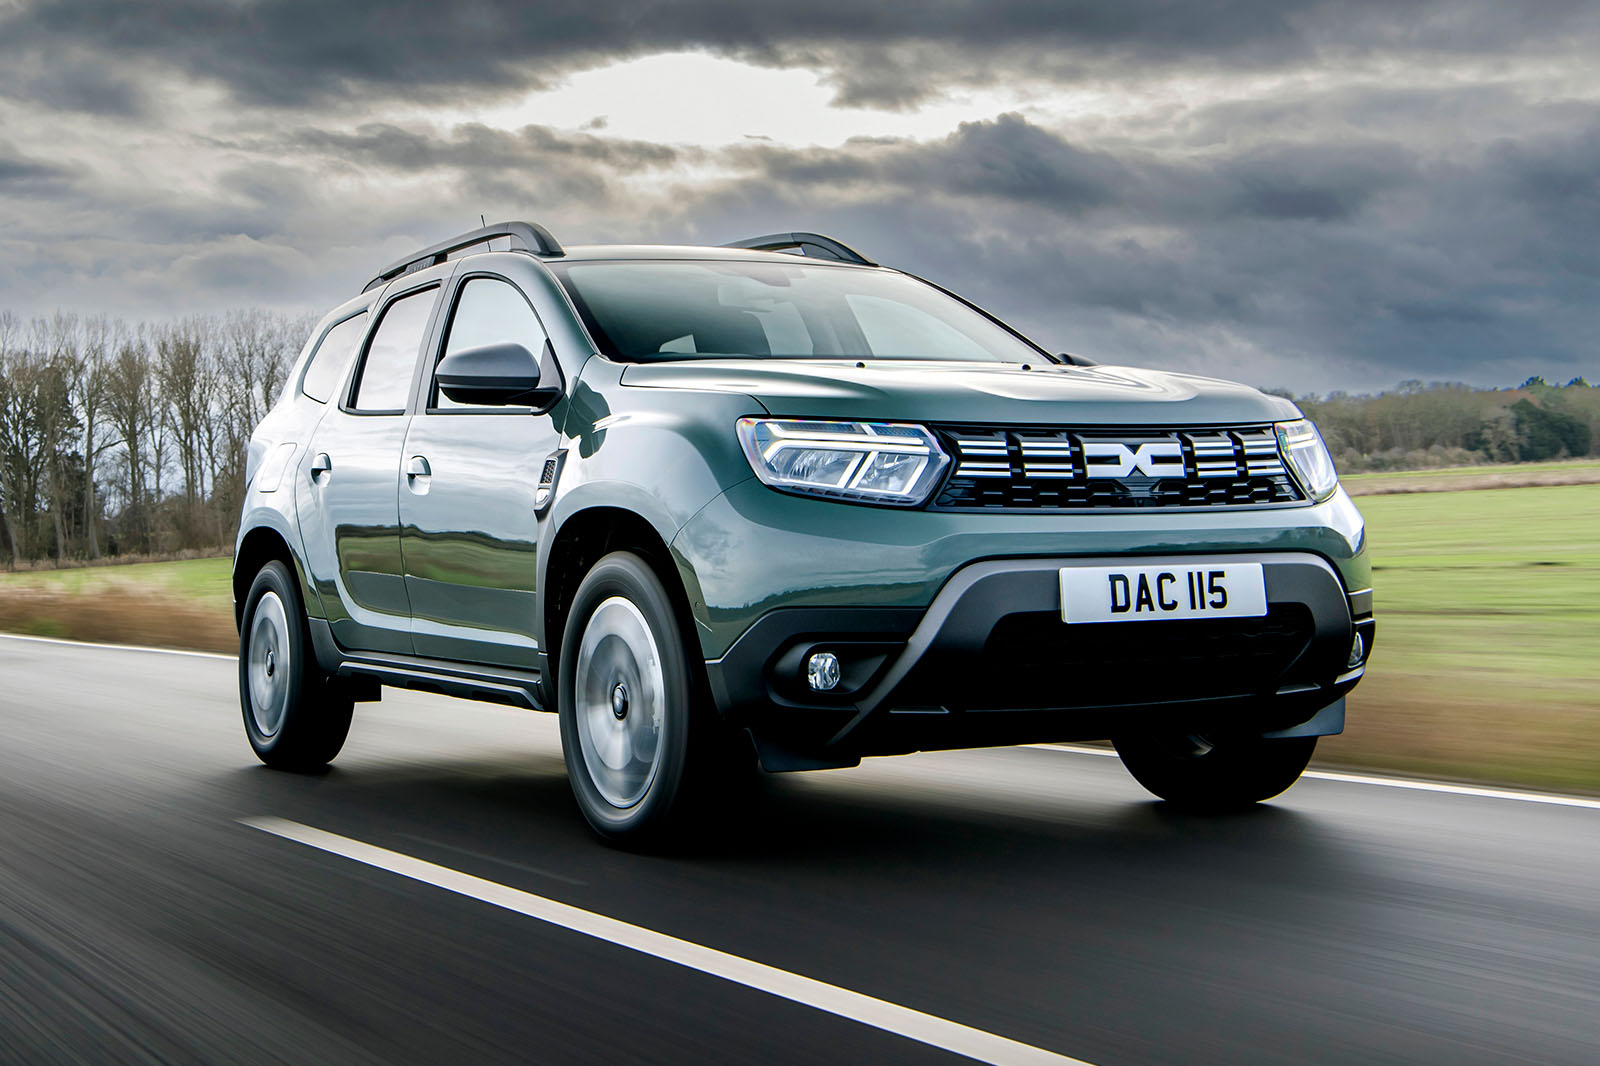 Dacia Logan test drive - will it be the needed affordable family vehicle?